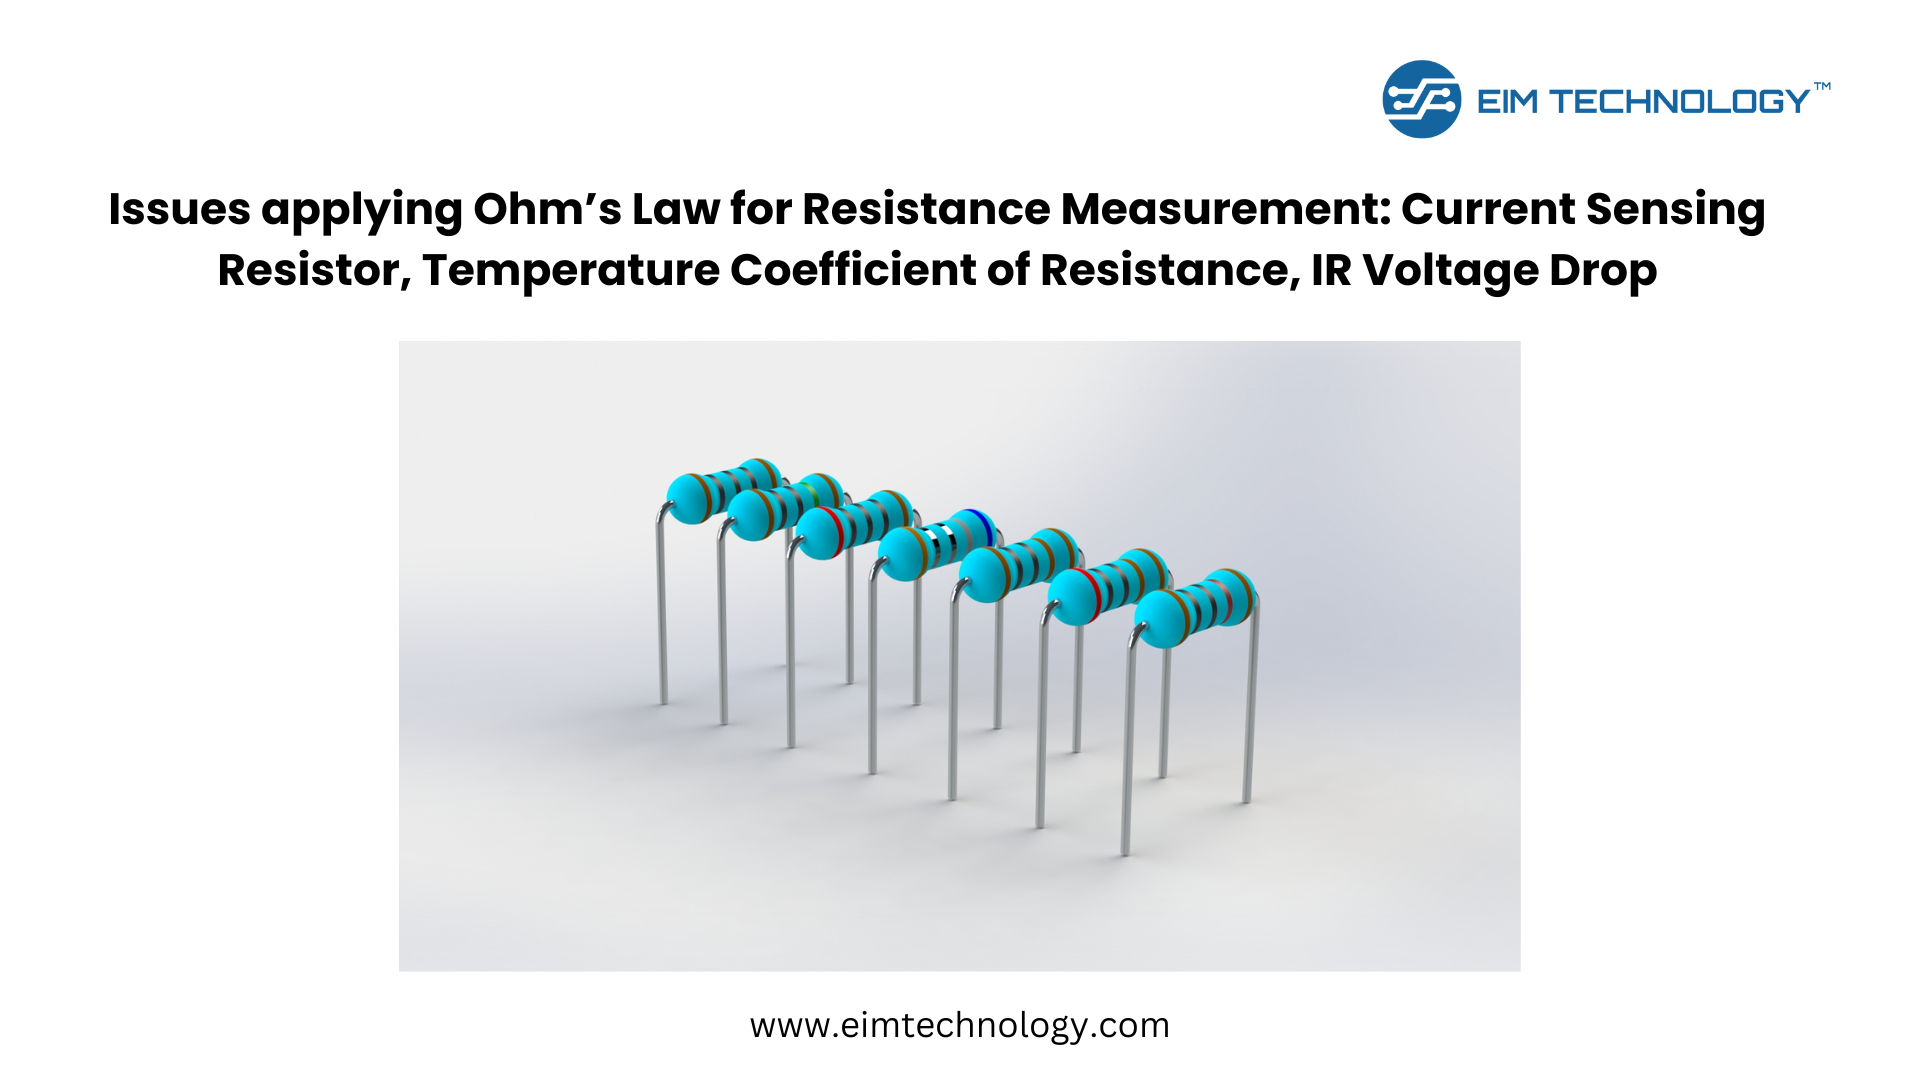 Issues applying Ohm’s Law for Resistance Measurement: Current Sensing Resistor, Temperature Coefficient of Resistance, IR Voltage Drop & more.